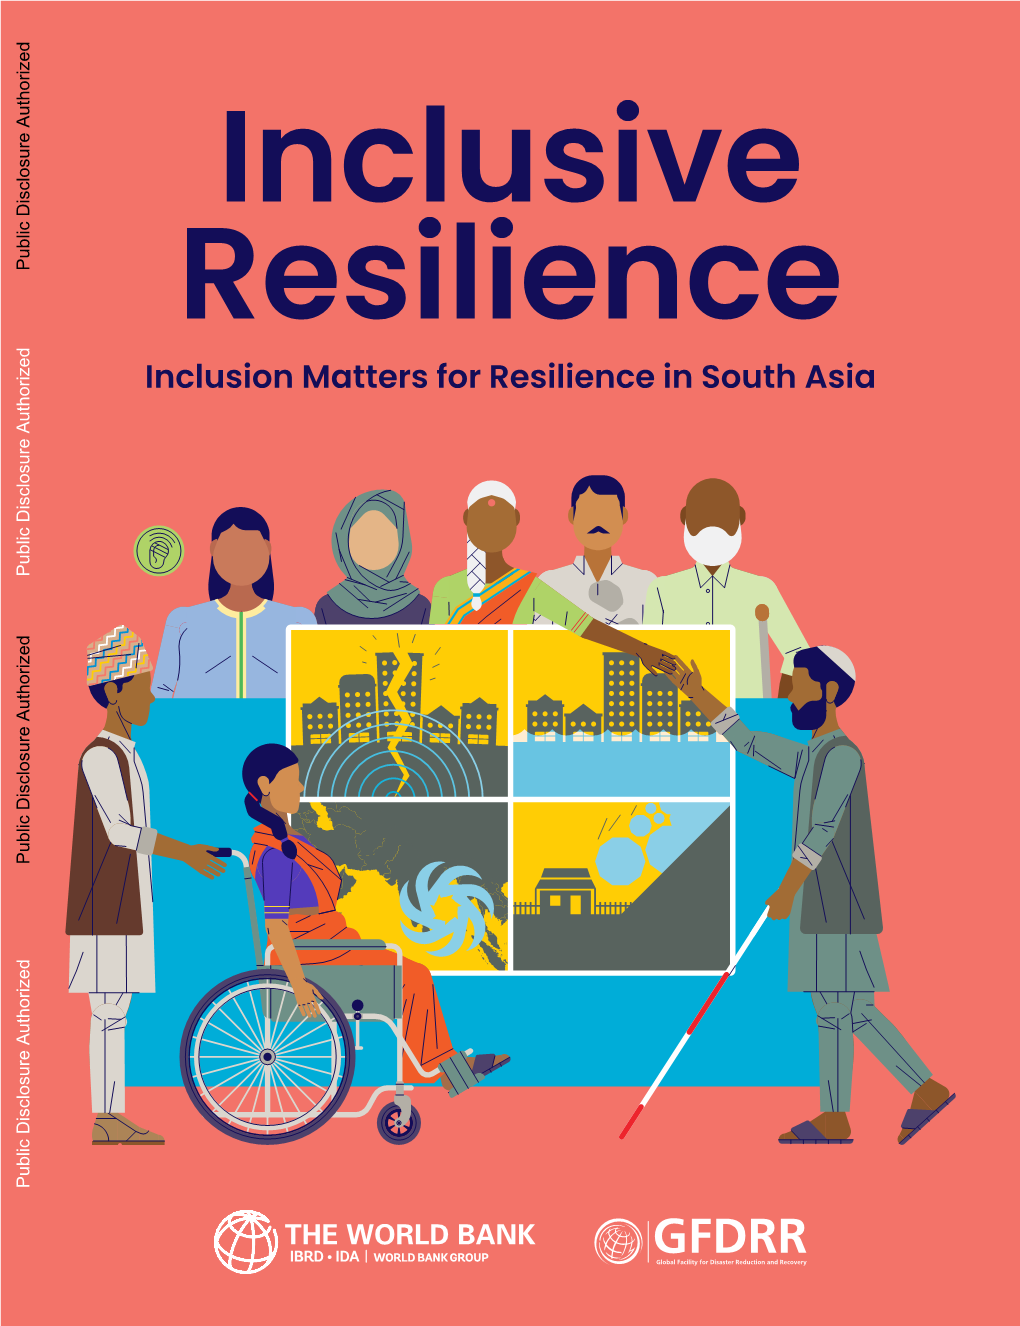 Inclusion Matters for Resilience in South Asia